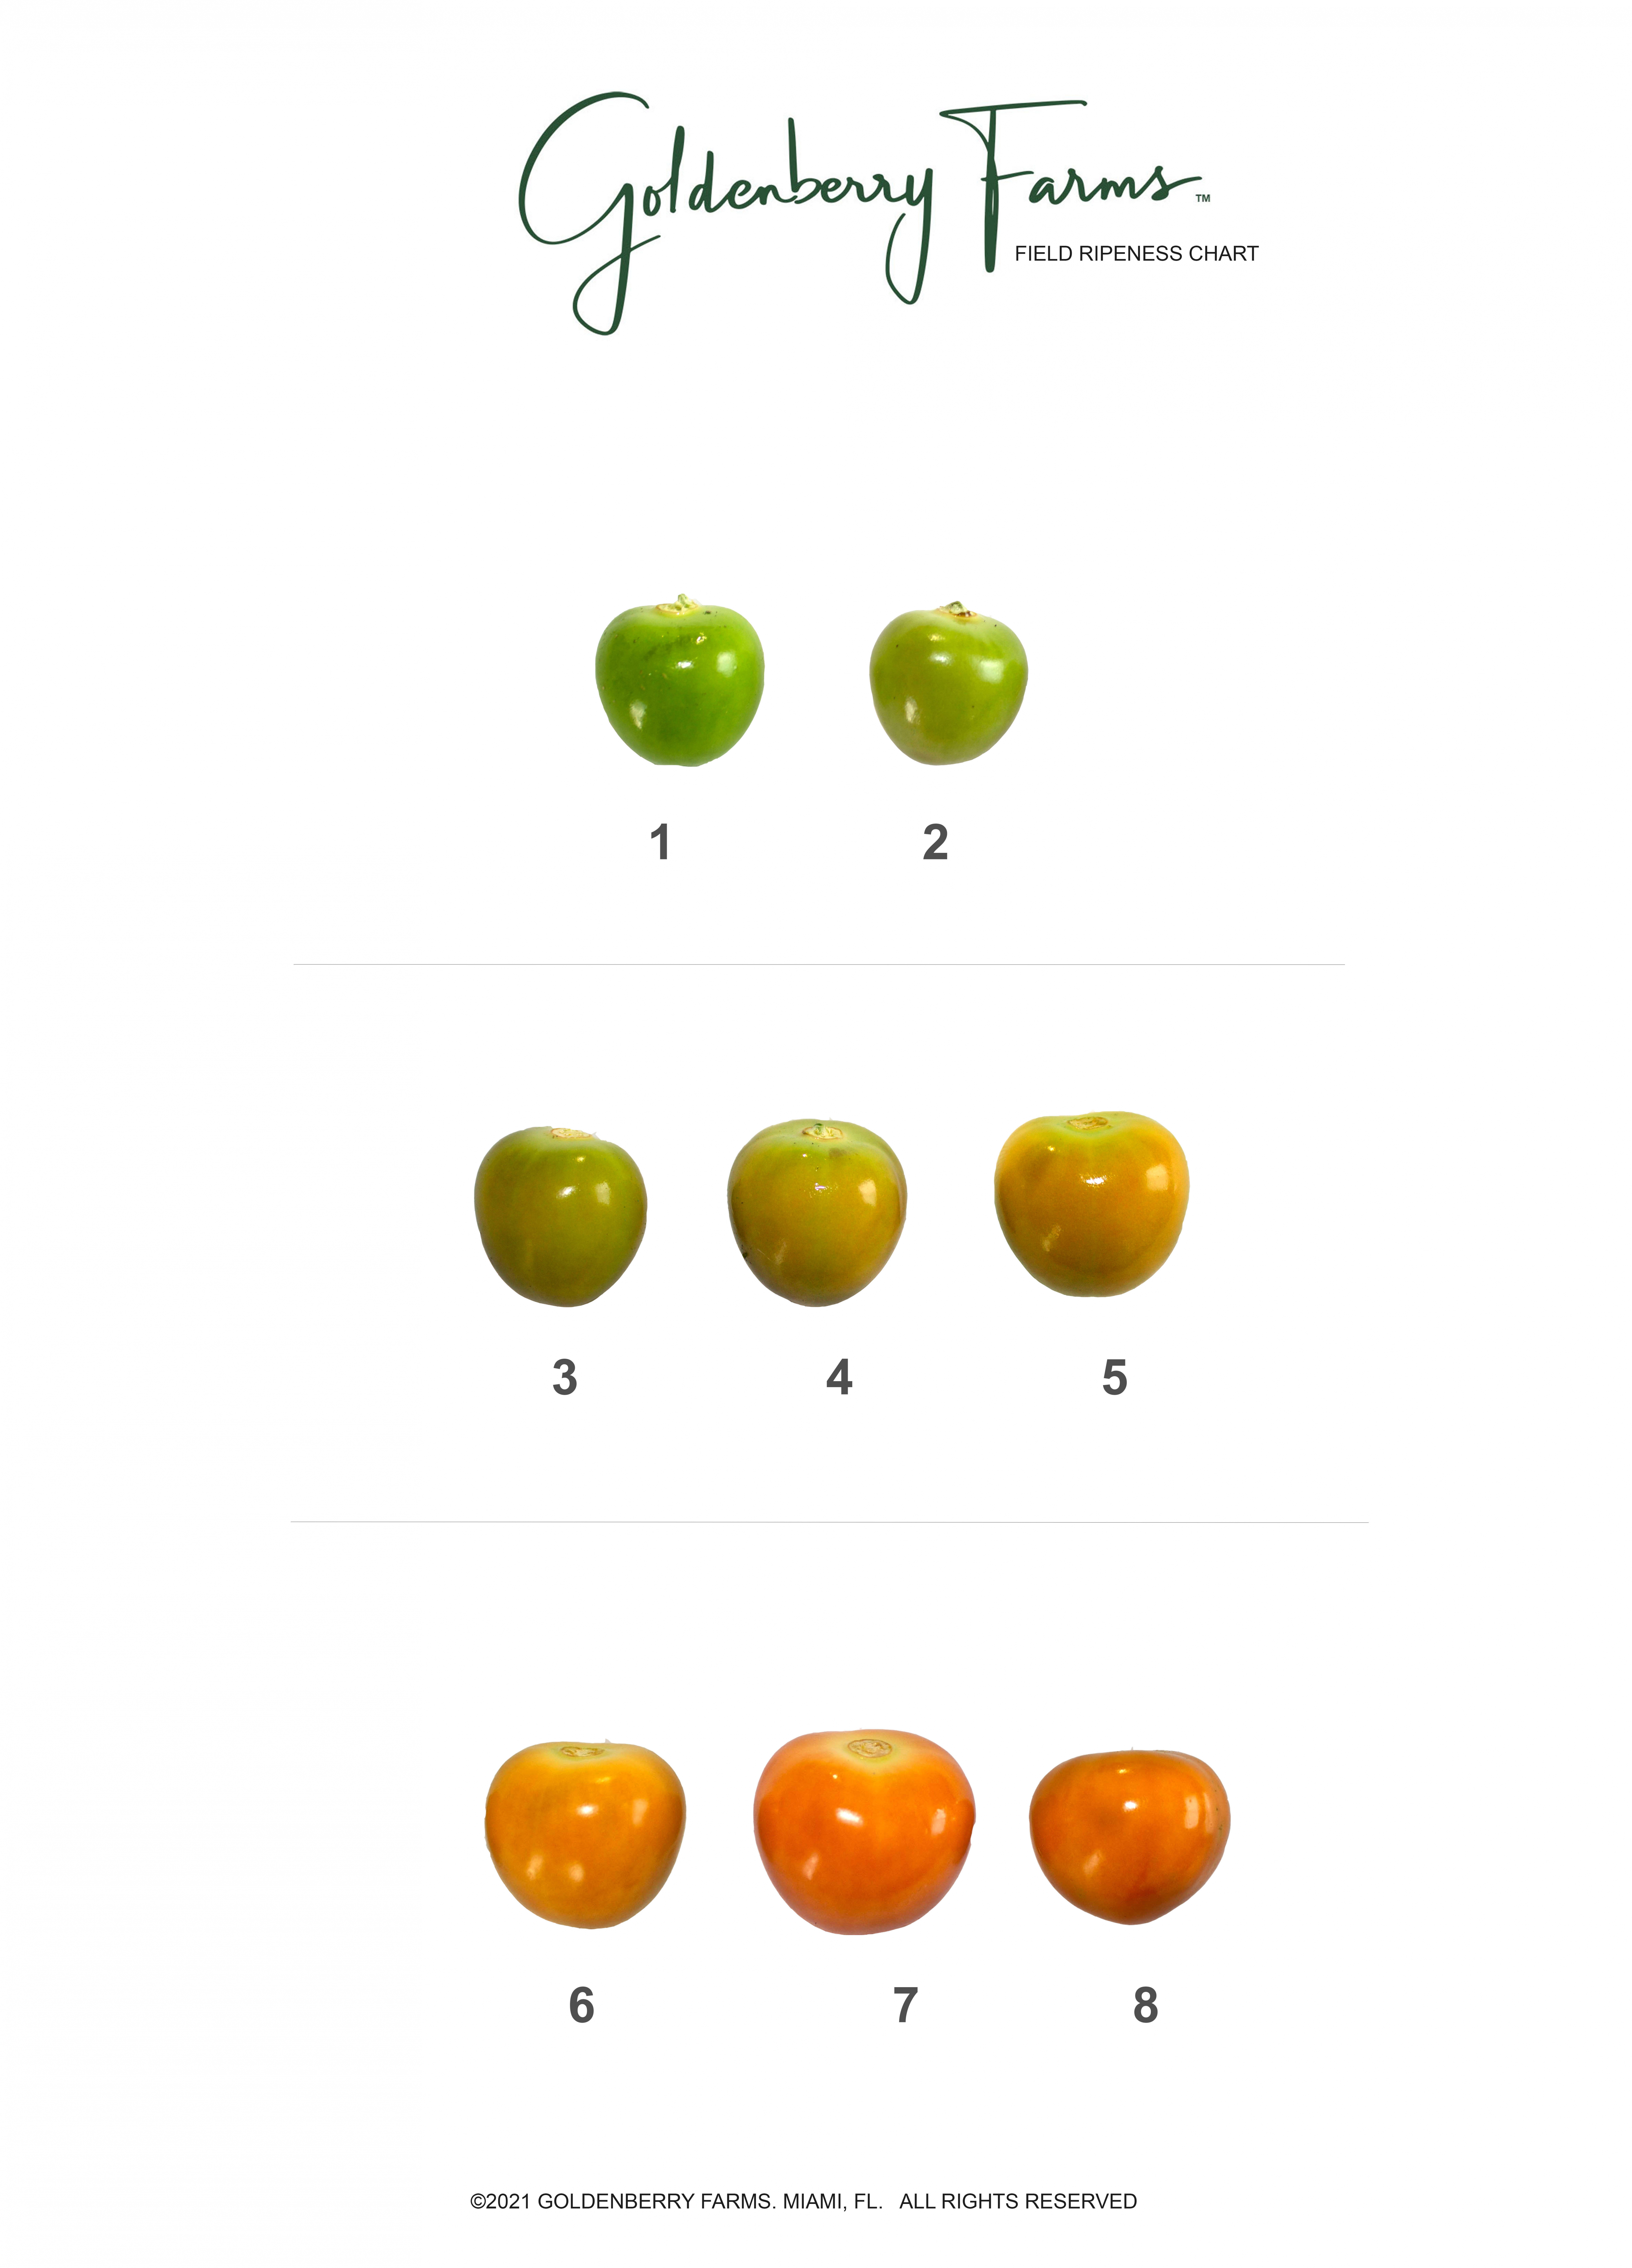 Technical chart showing ripeness levels of goldenberry / cape gooseberry / physalis Image